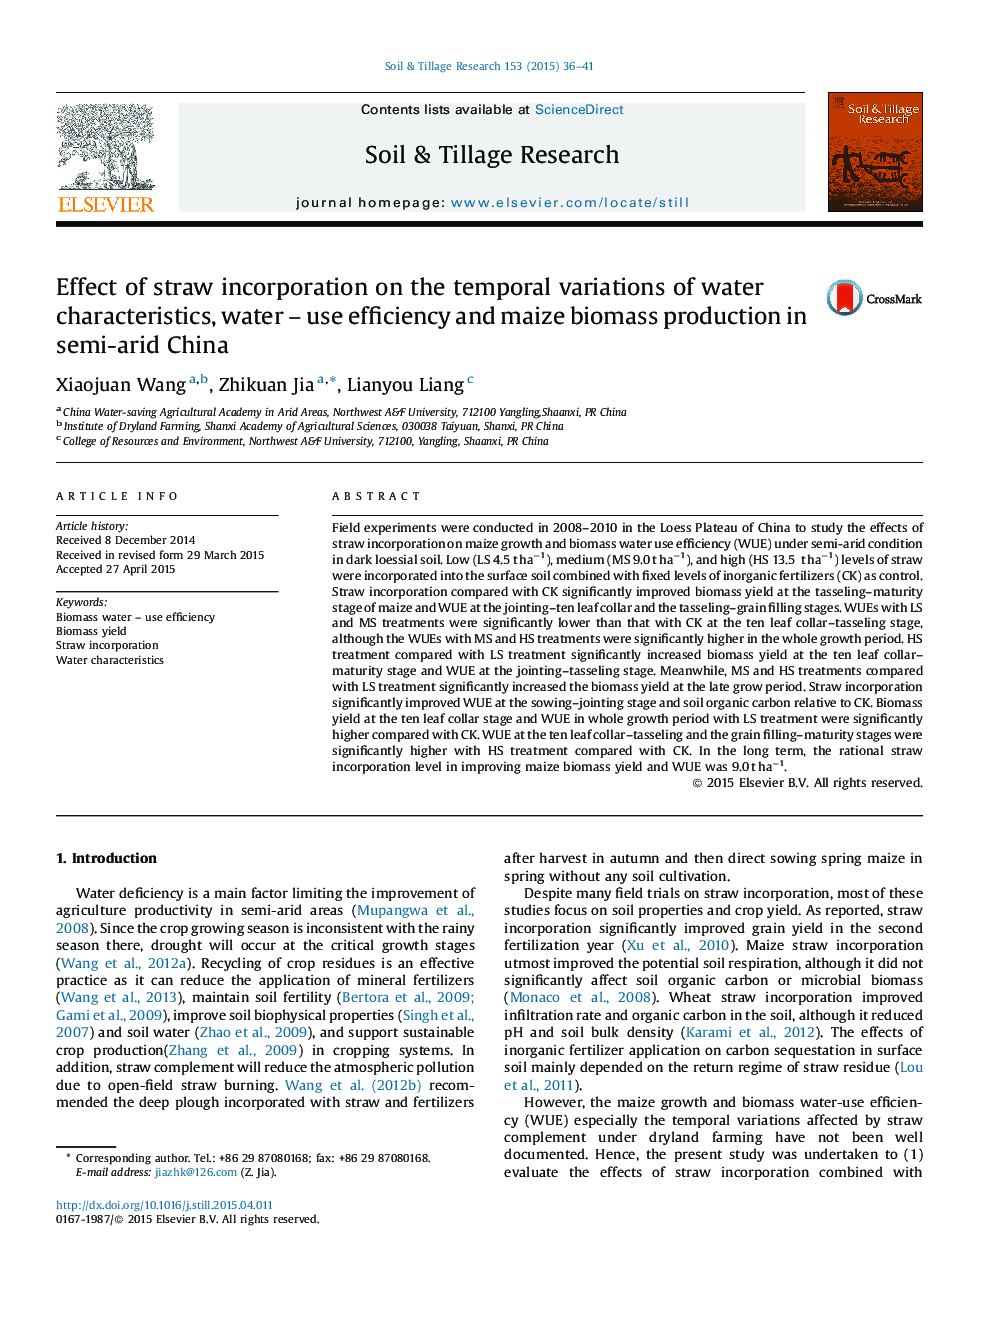 Effect of straw incorporation on the temporal variations of water characteristics, water – use efficiency and maize biomass production in semi-arid China